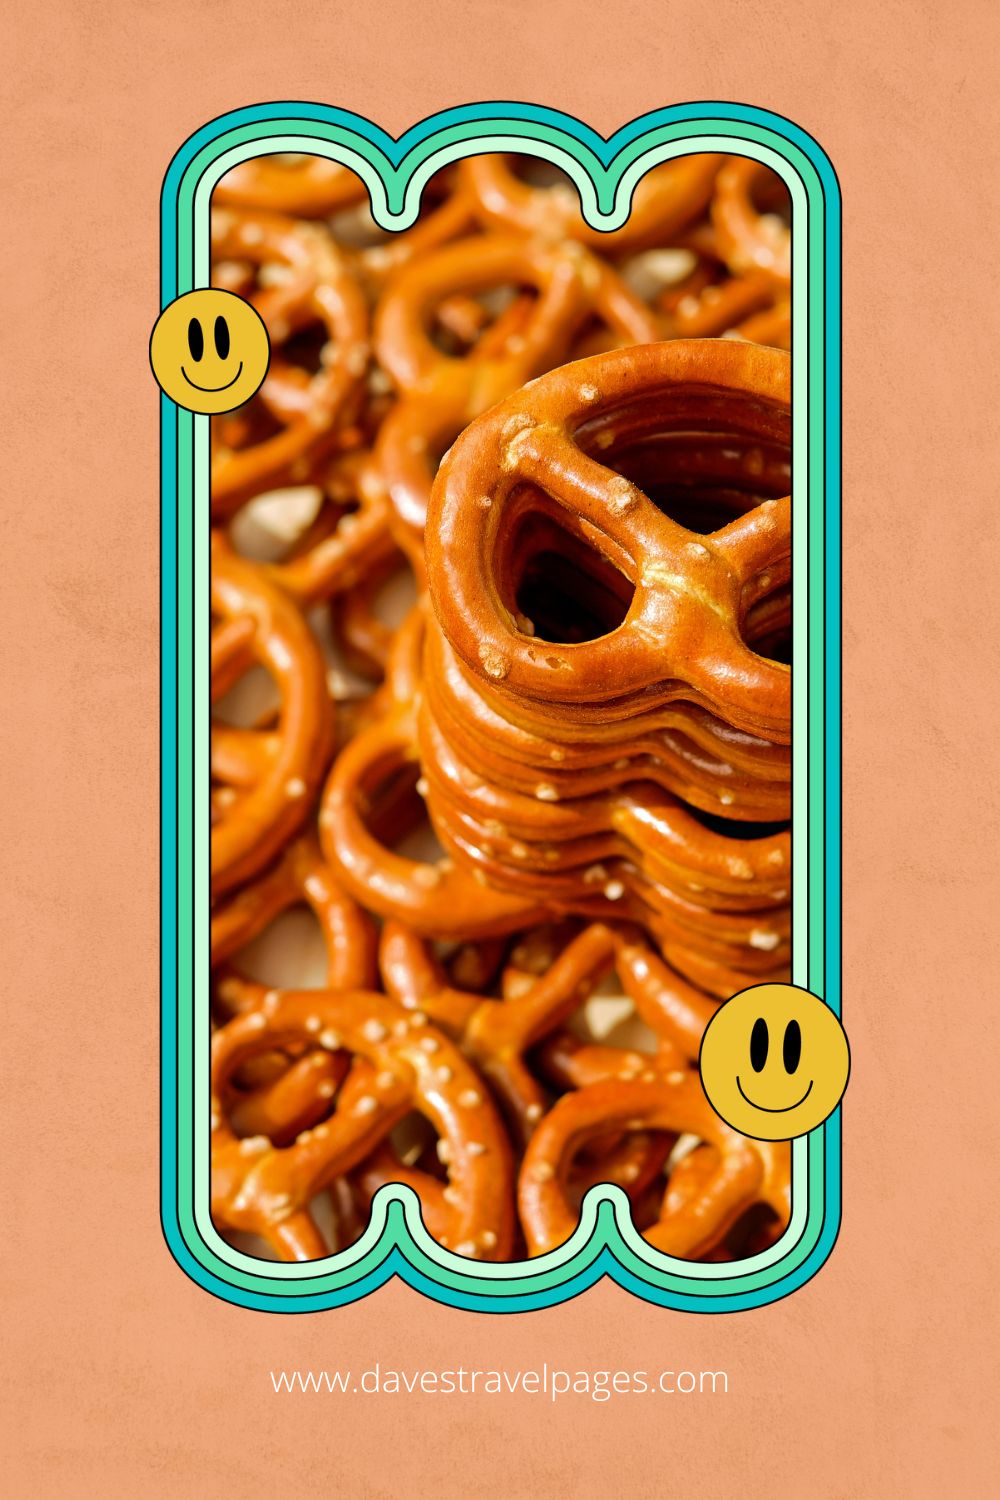 Pretzels can be snacked on while driving on a road trip across country